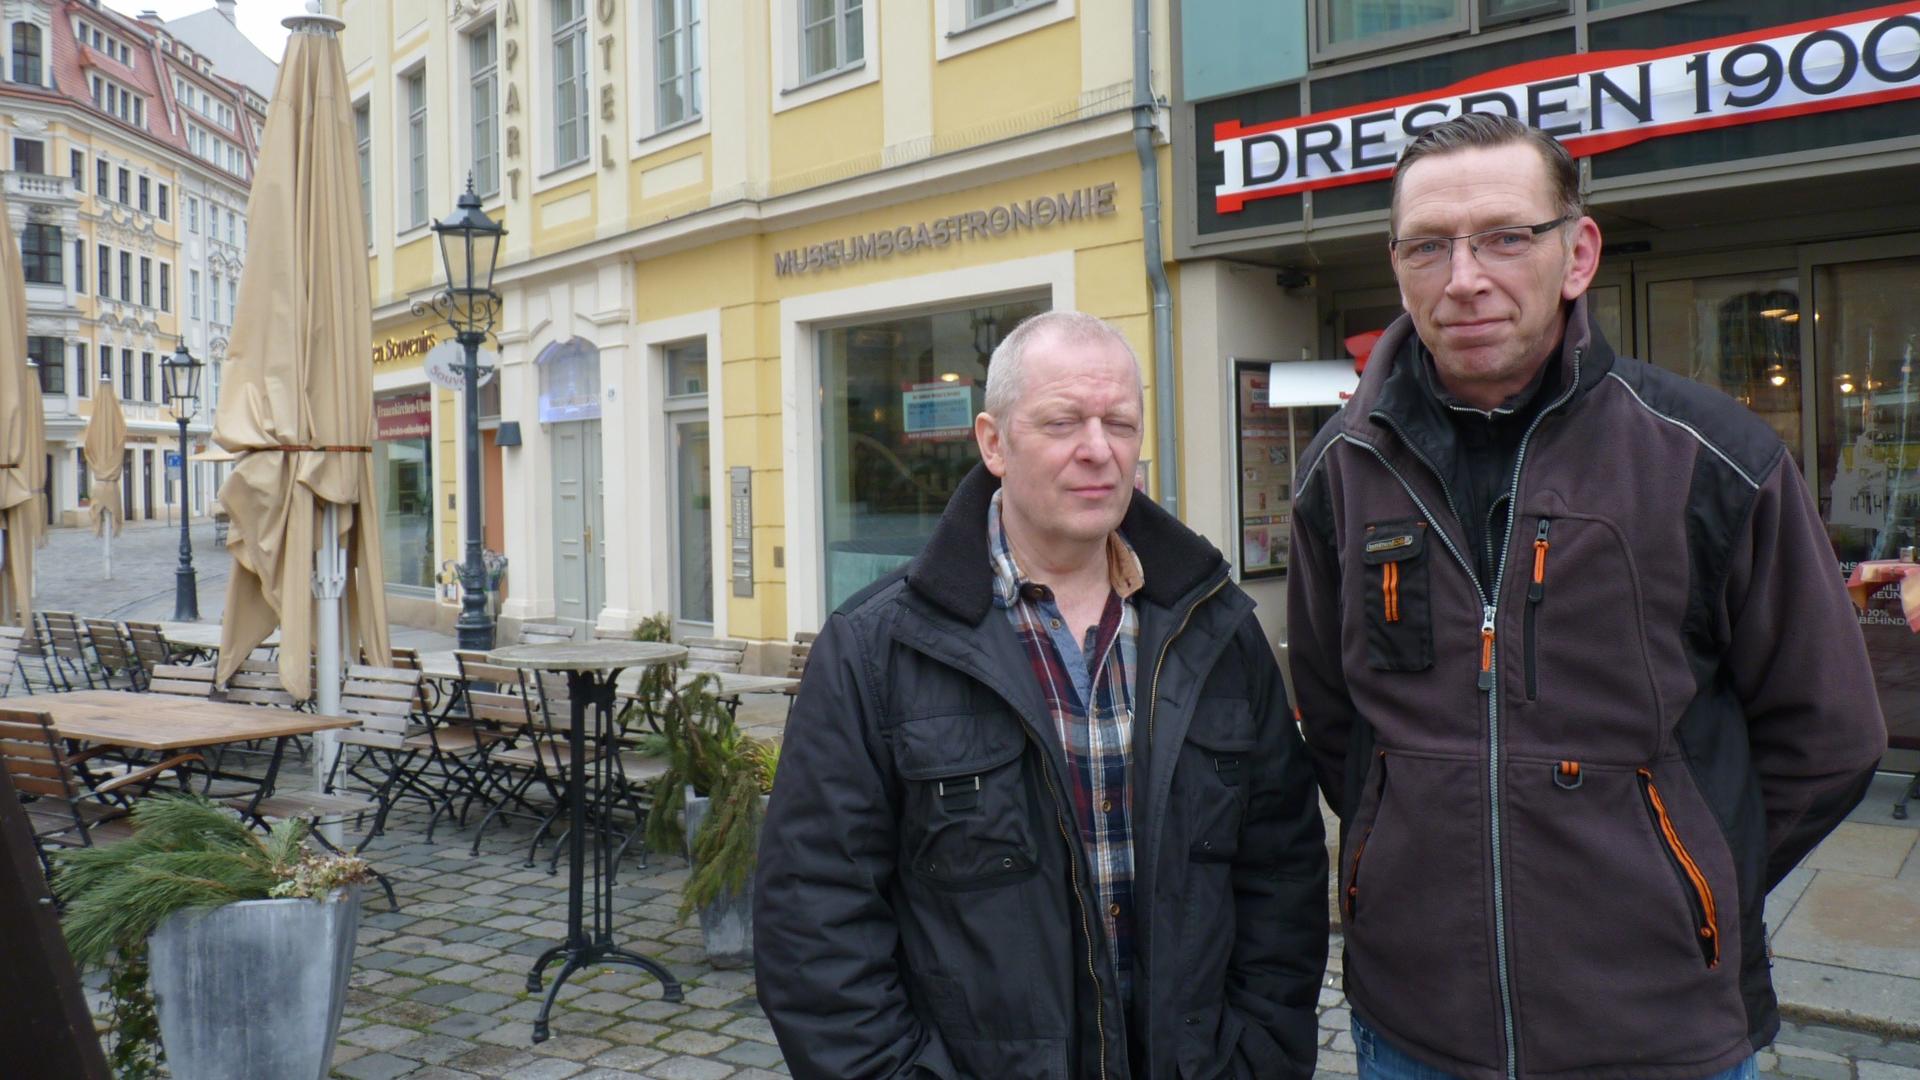 Achim Exner (R) and Rene Jahn are part of a PEGIDA off-shoot group calling itself, Direct Democracy for Europe.